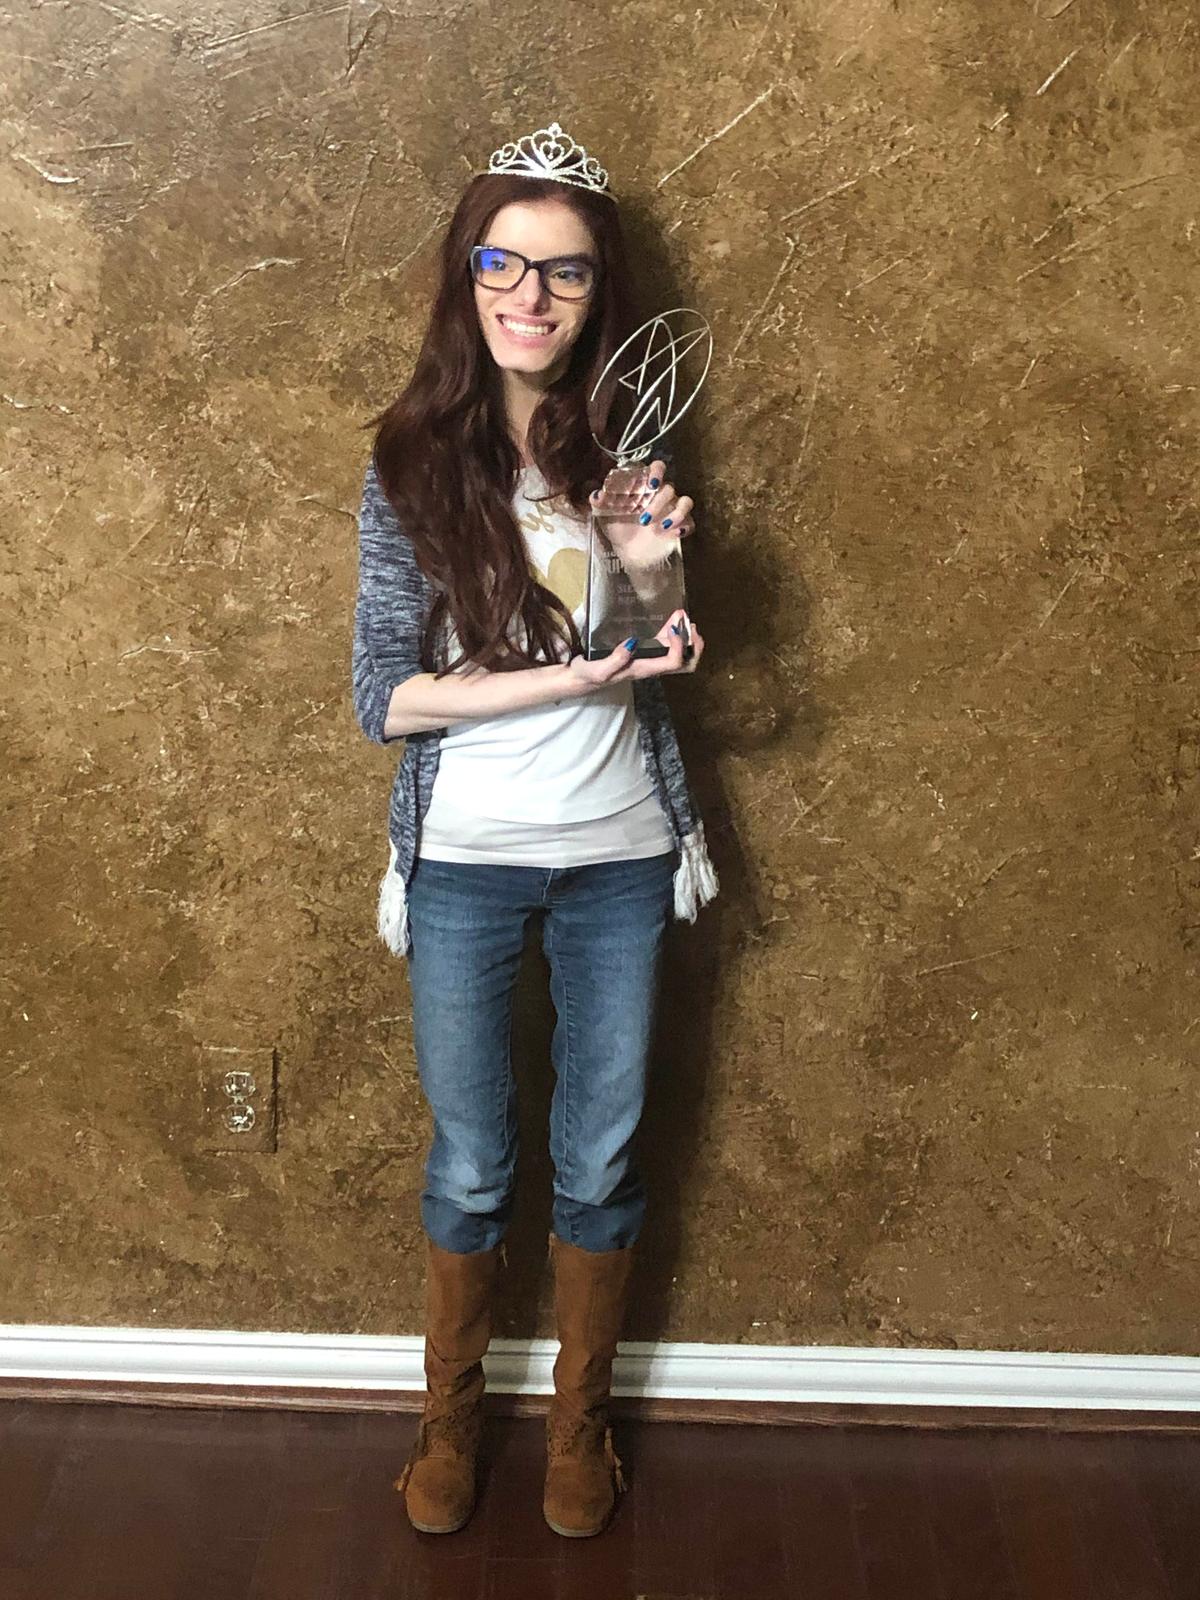 Sienna with her Night of Superstars Award, in Houston, on April 10, 2022. (Courtesy of <a href="https://www.facebook.com/officialChrissyBernal">Chrissy Bernal</a>)